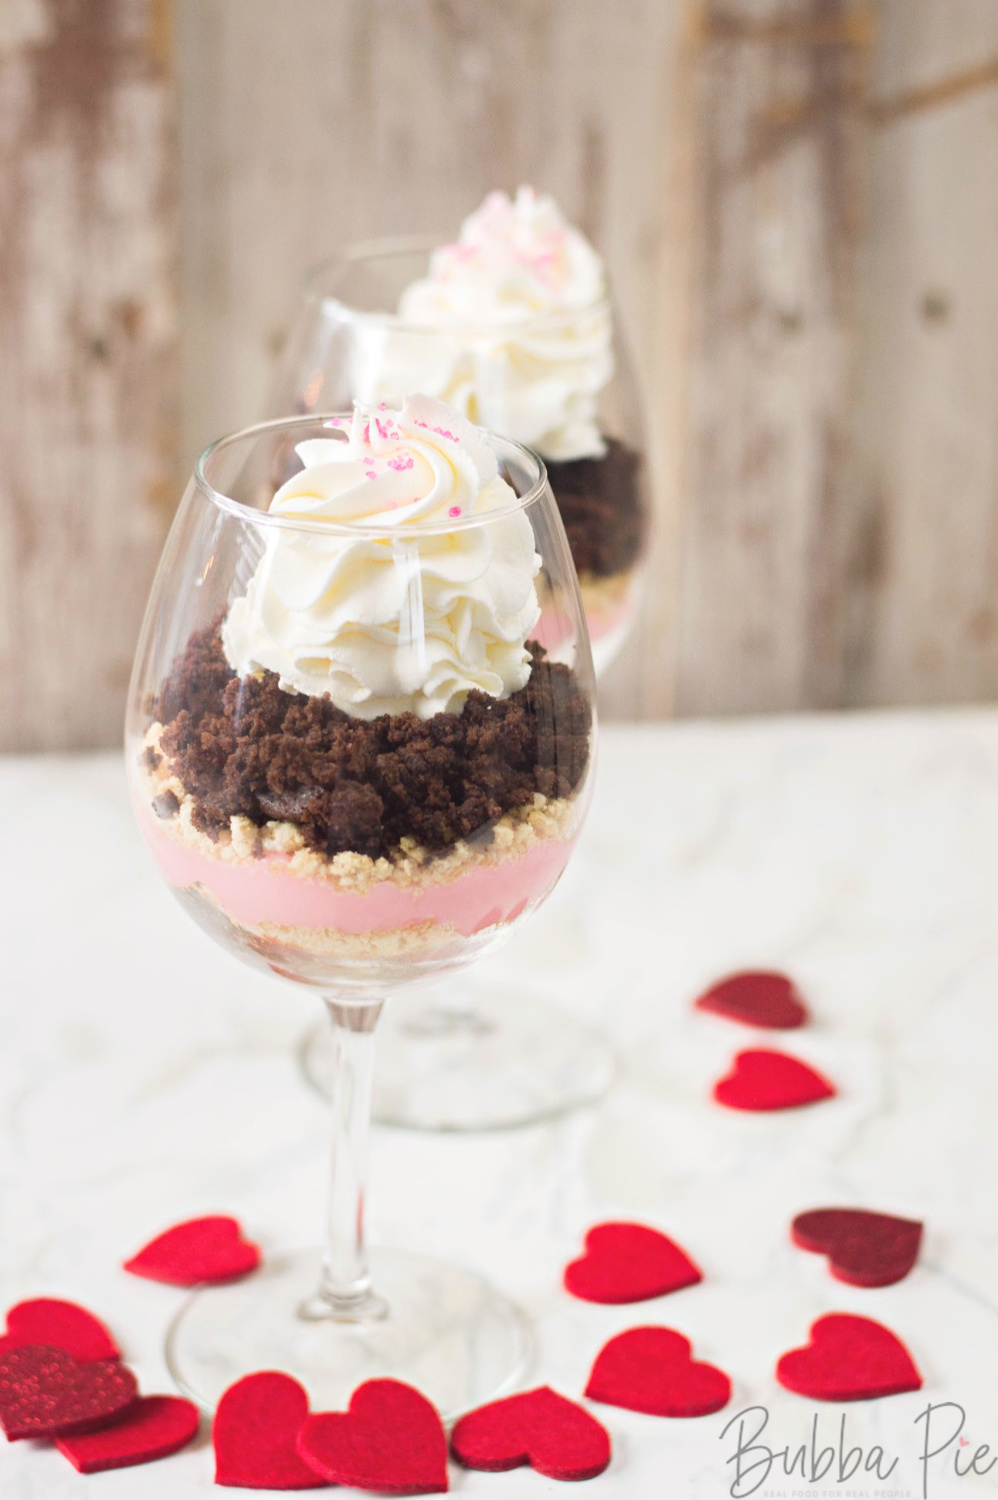 Pudding Parfait Recipe sitting on a table decorated for Valentine's Day